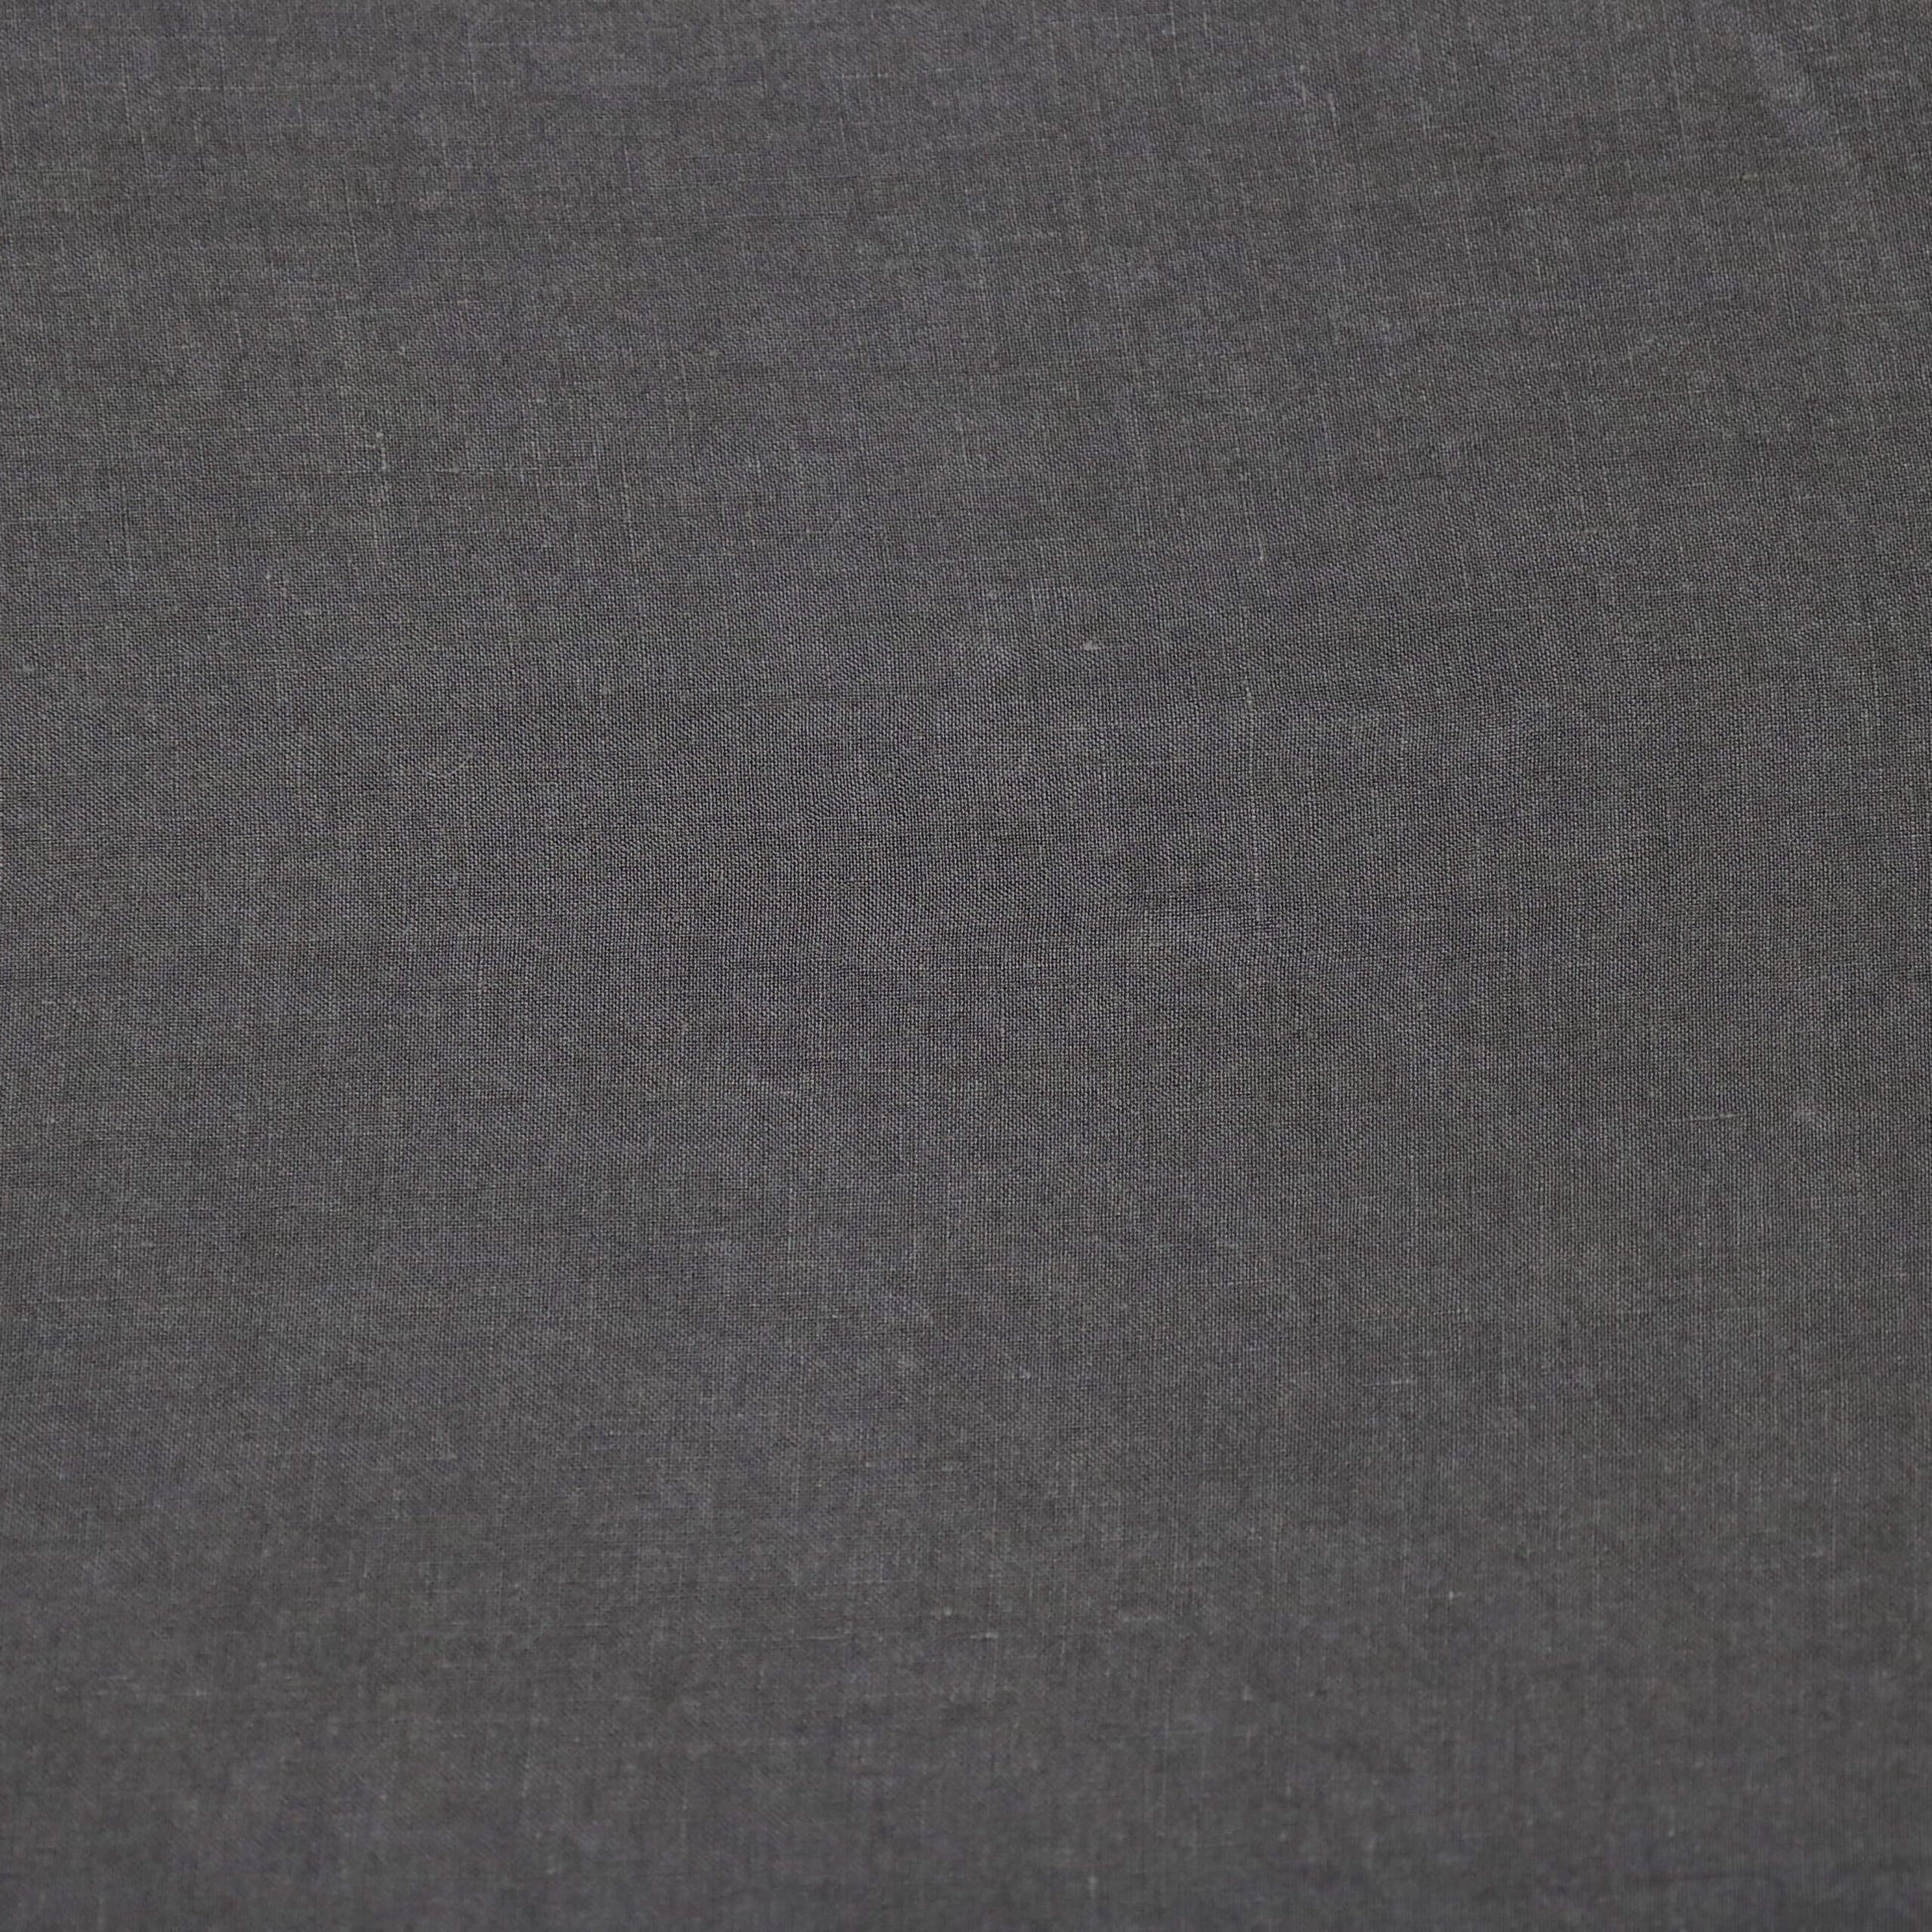 Bedsheet in linen from Society Limonta color Anthracite dark grey